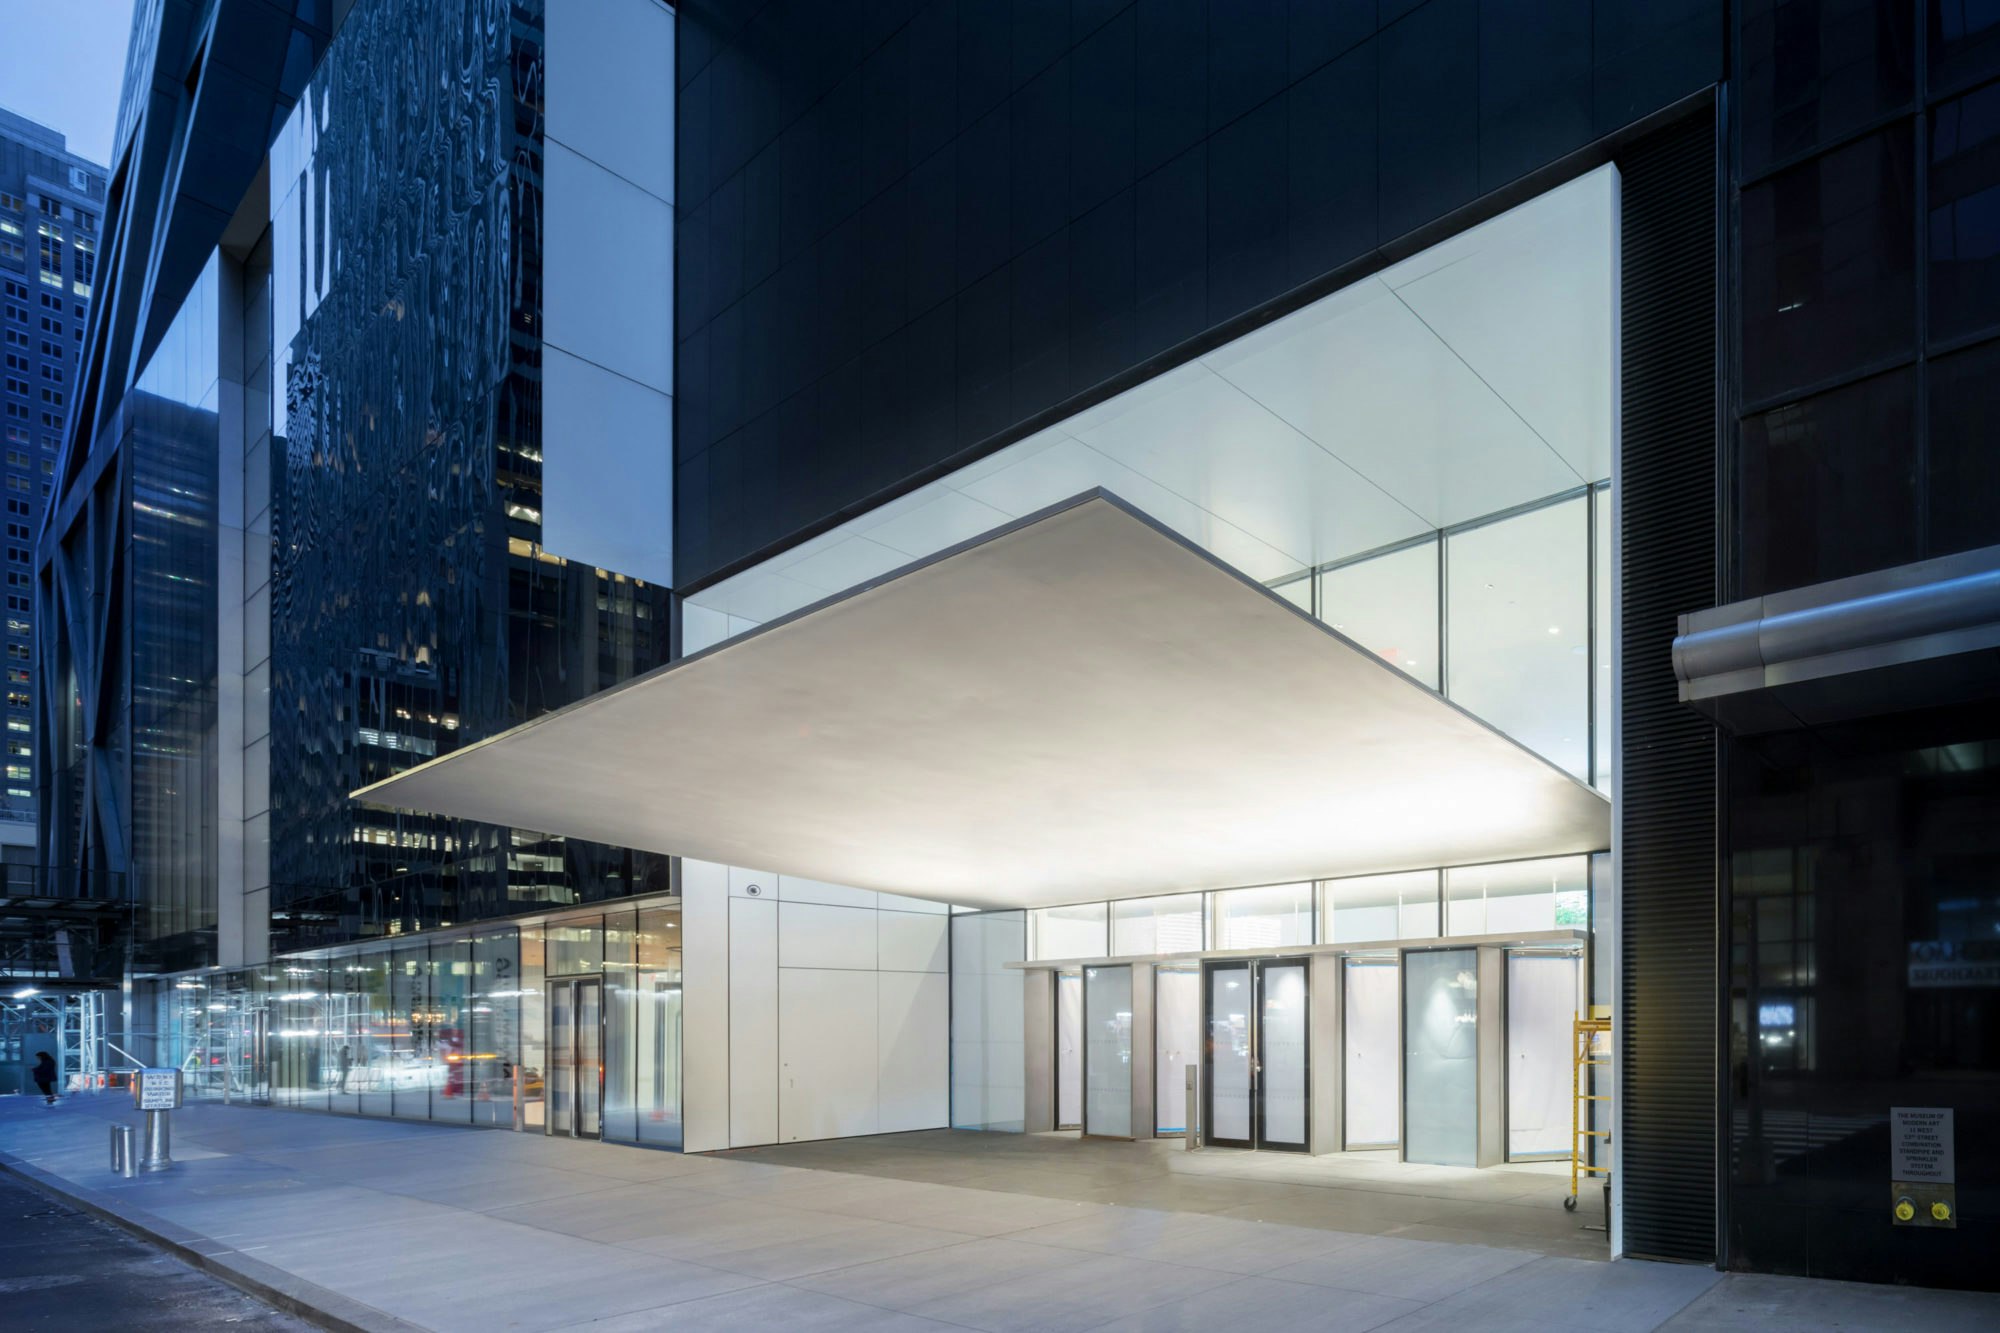 The street entrance of the new Museum of Modern Art canopy